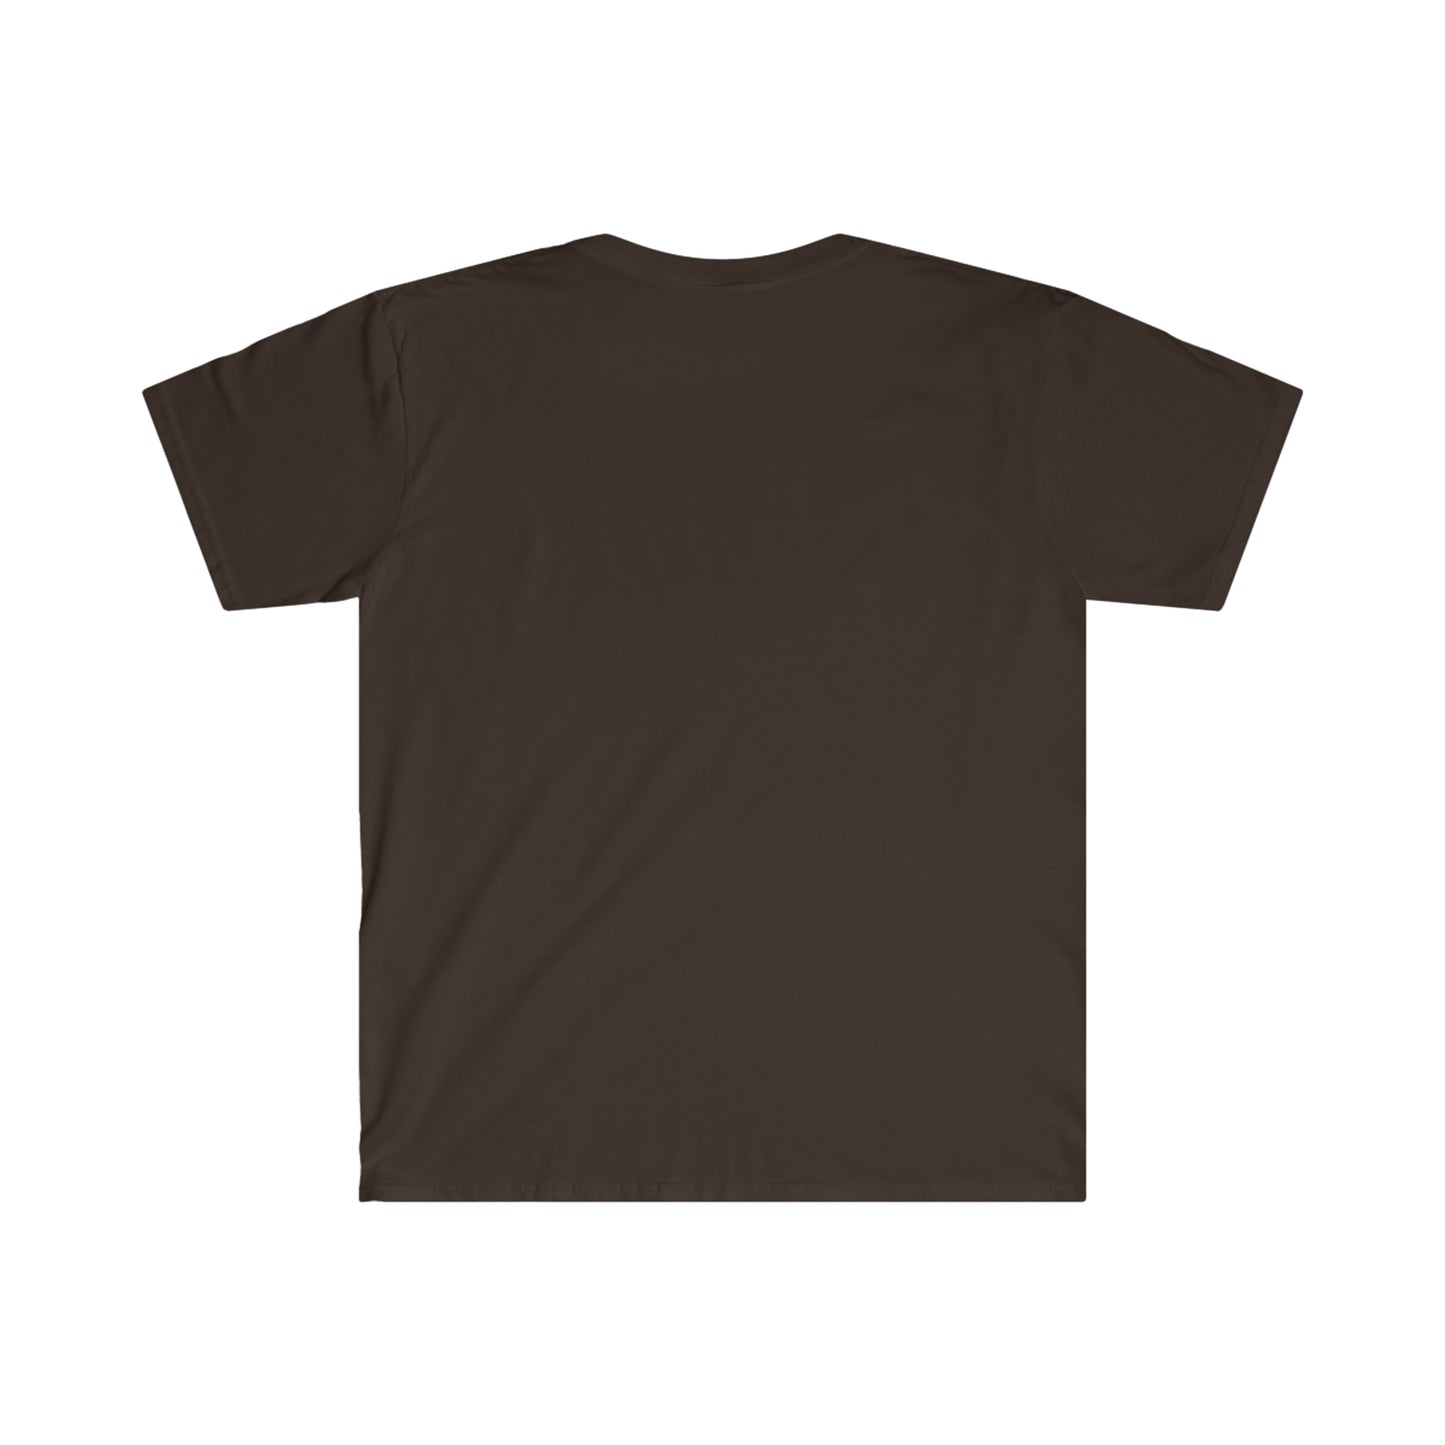 You had me at Coffee Unisex Softstyle T-Shirt